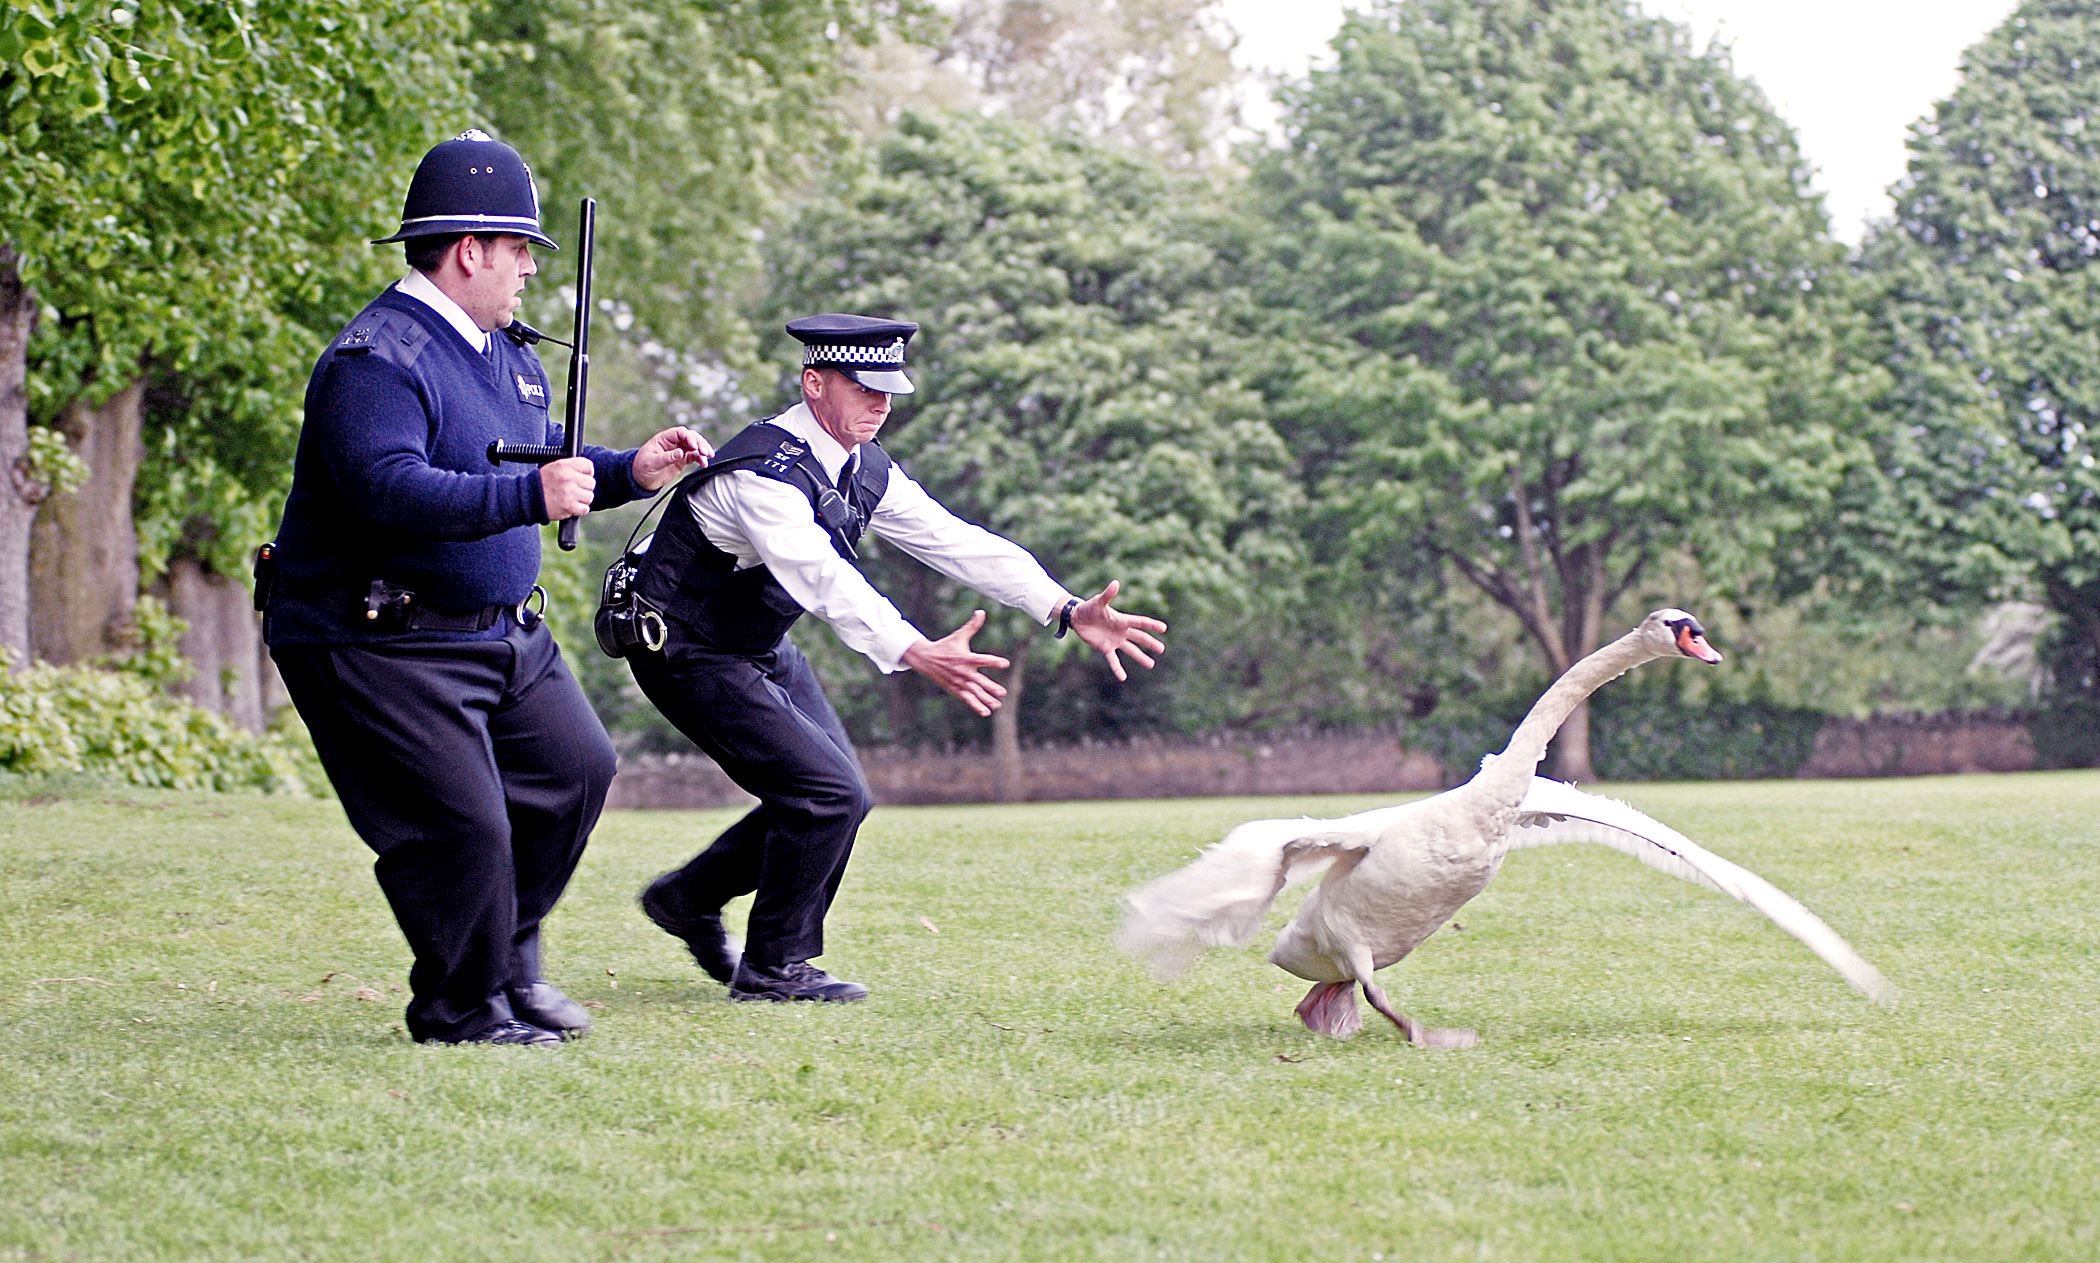 HOT FUZZ, Nick Frost, Simon Pegg, 2007. ©Rogue Pictures/courtesy Everett Collection